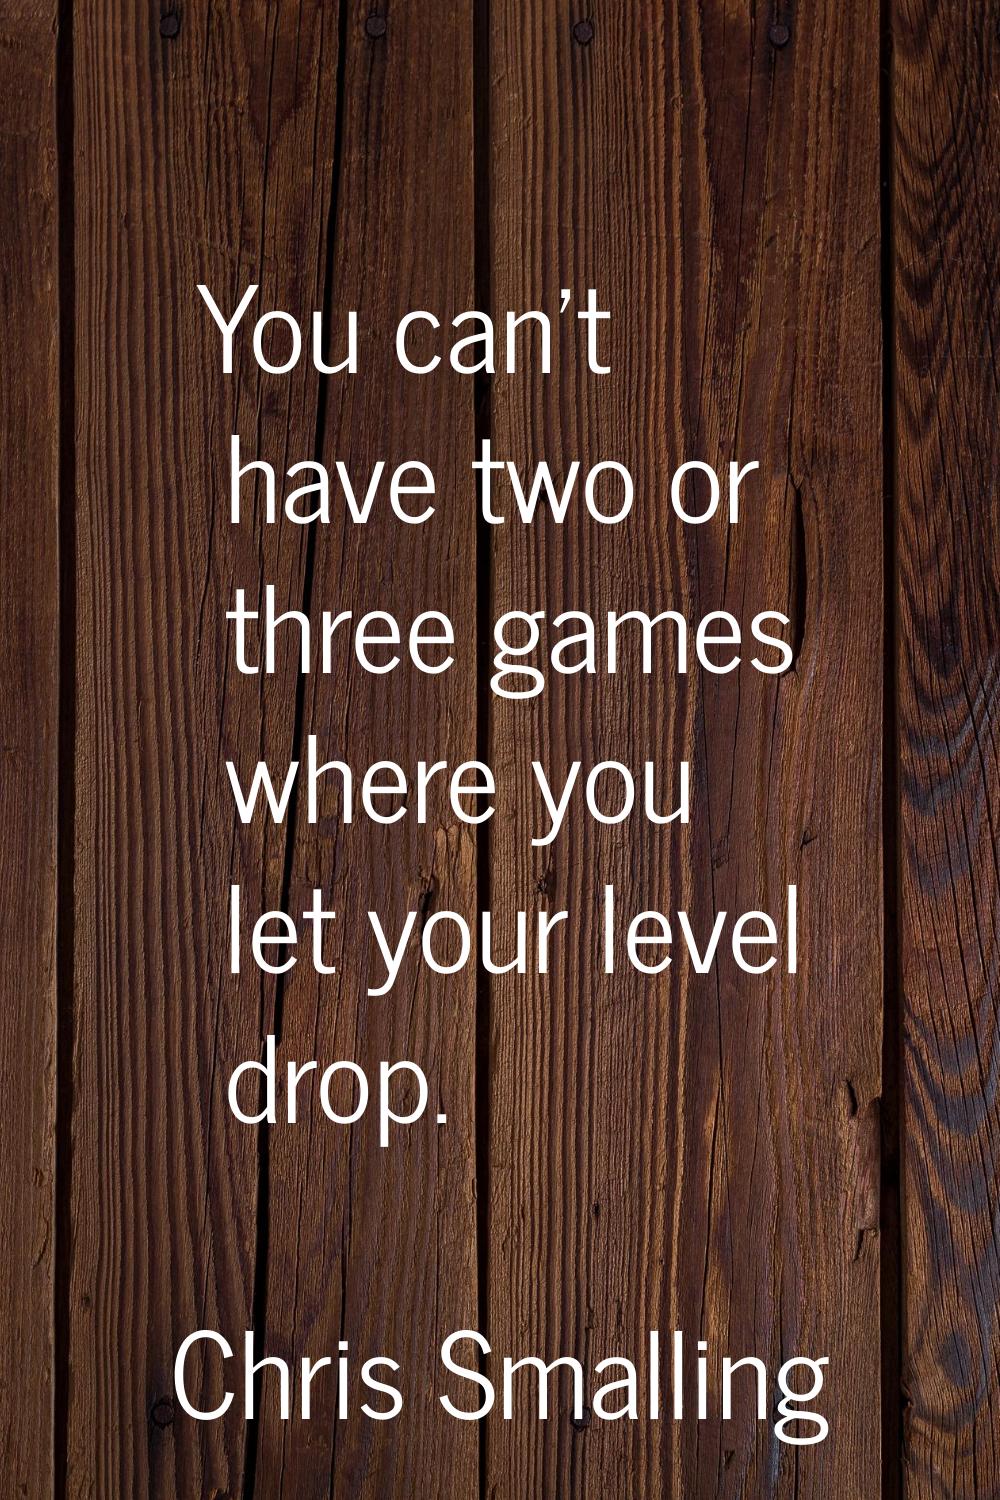 You can't have two or three games where you let your level drop.